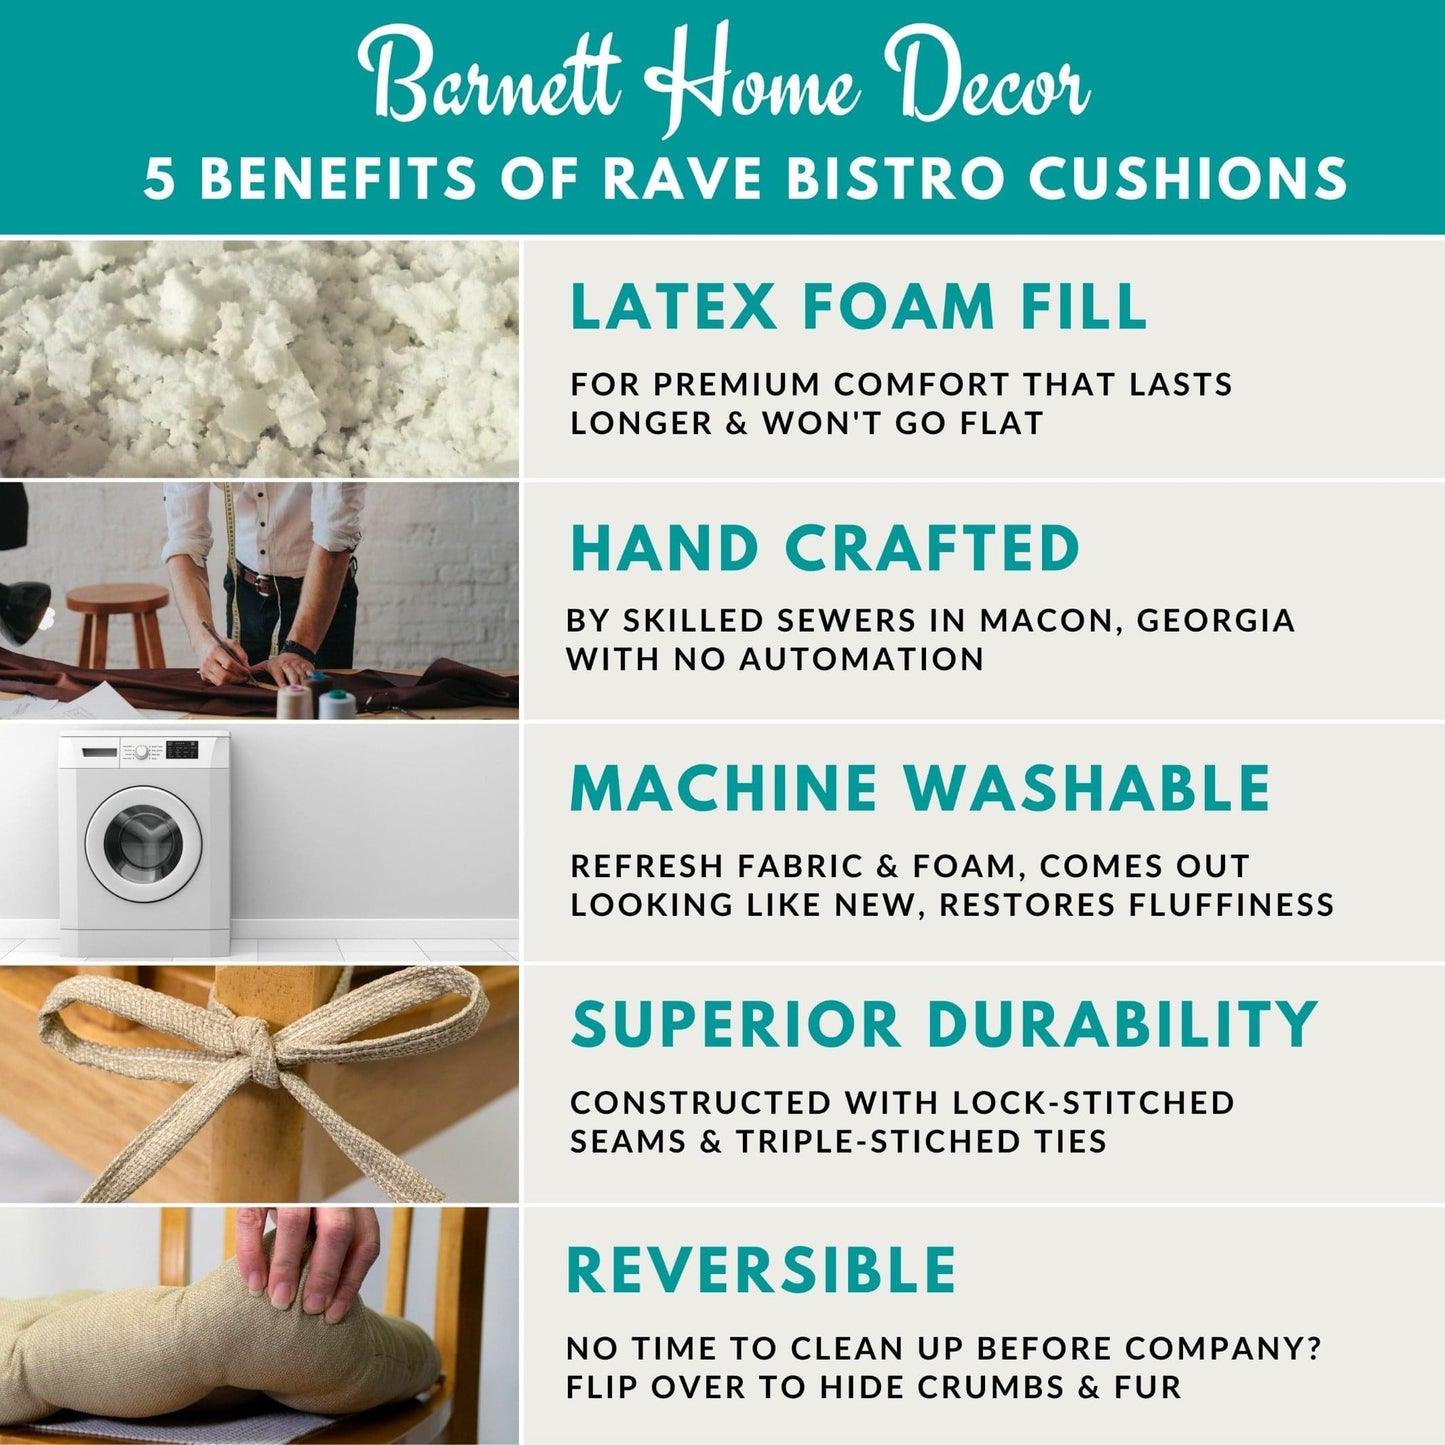 Barnett Home Decor Top 5 Benefits of Rave Bistro Cushions - Latex Foam Fill, Hand Crafted, Machine Washable, Superior Durability, Reversible